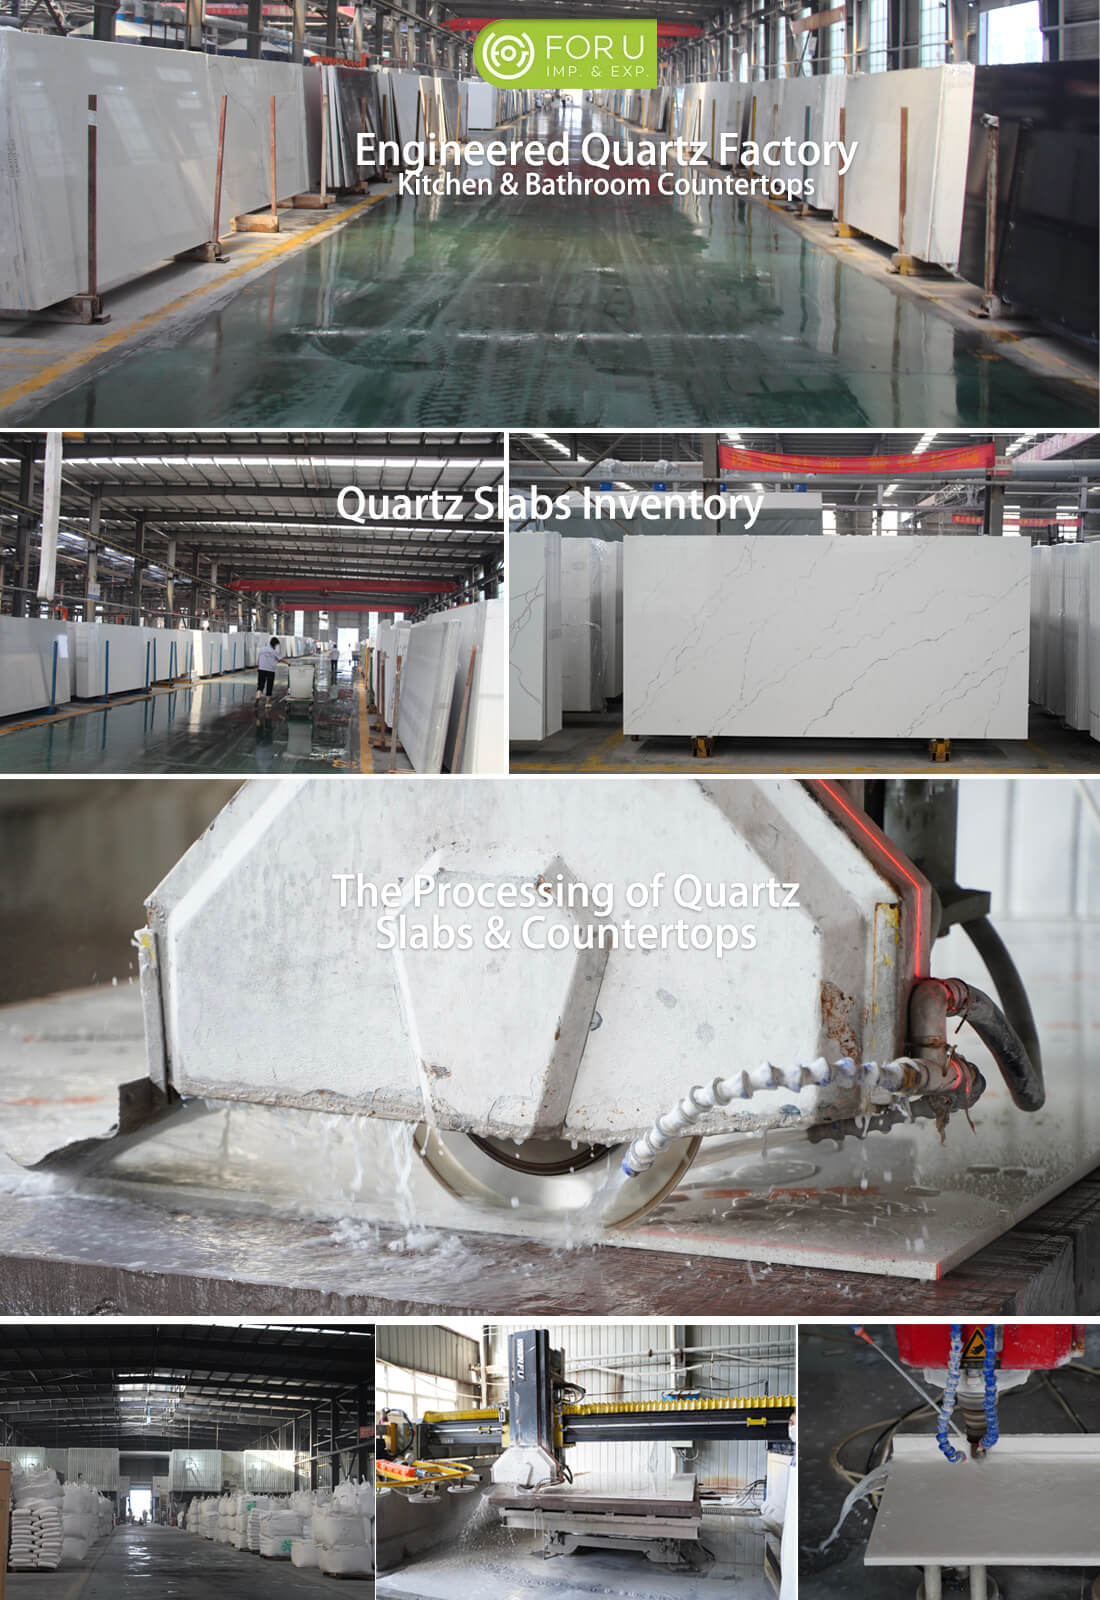 Chinese Leading Engineered Snow White Quartz Slabs and Countertops Factory | FOR U STONE